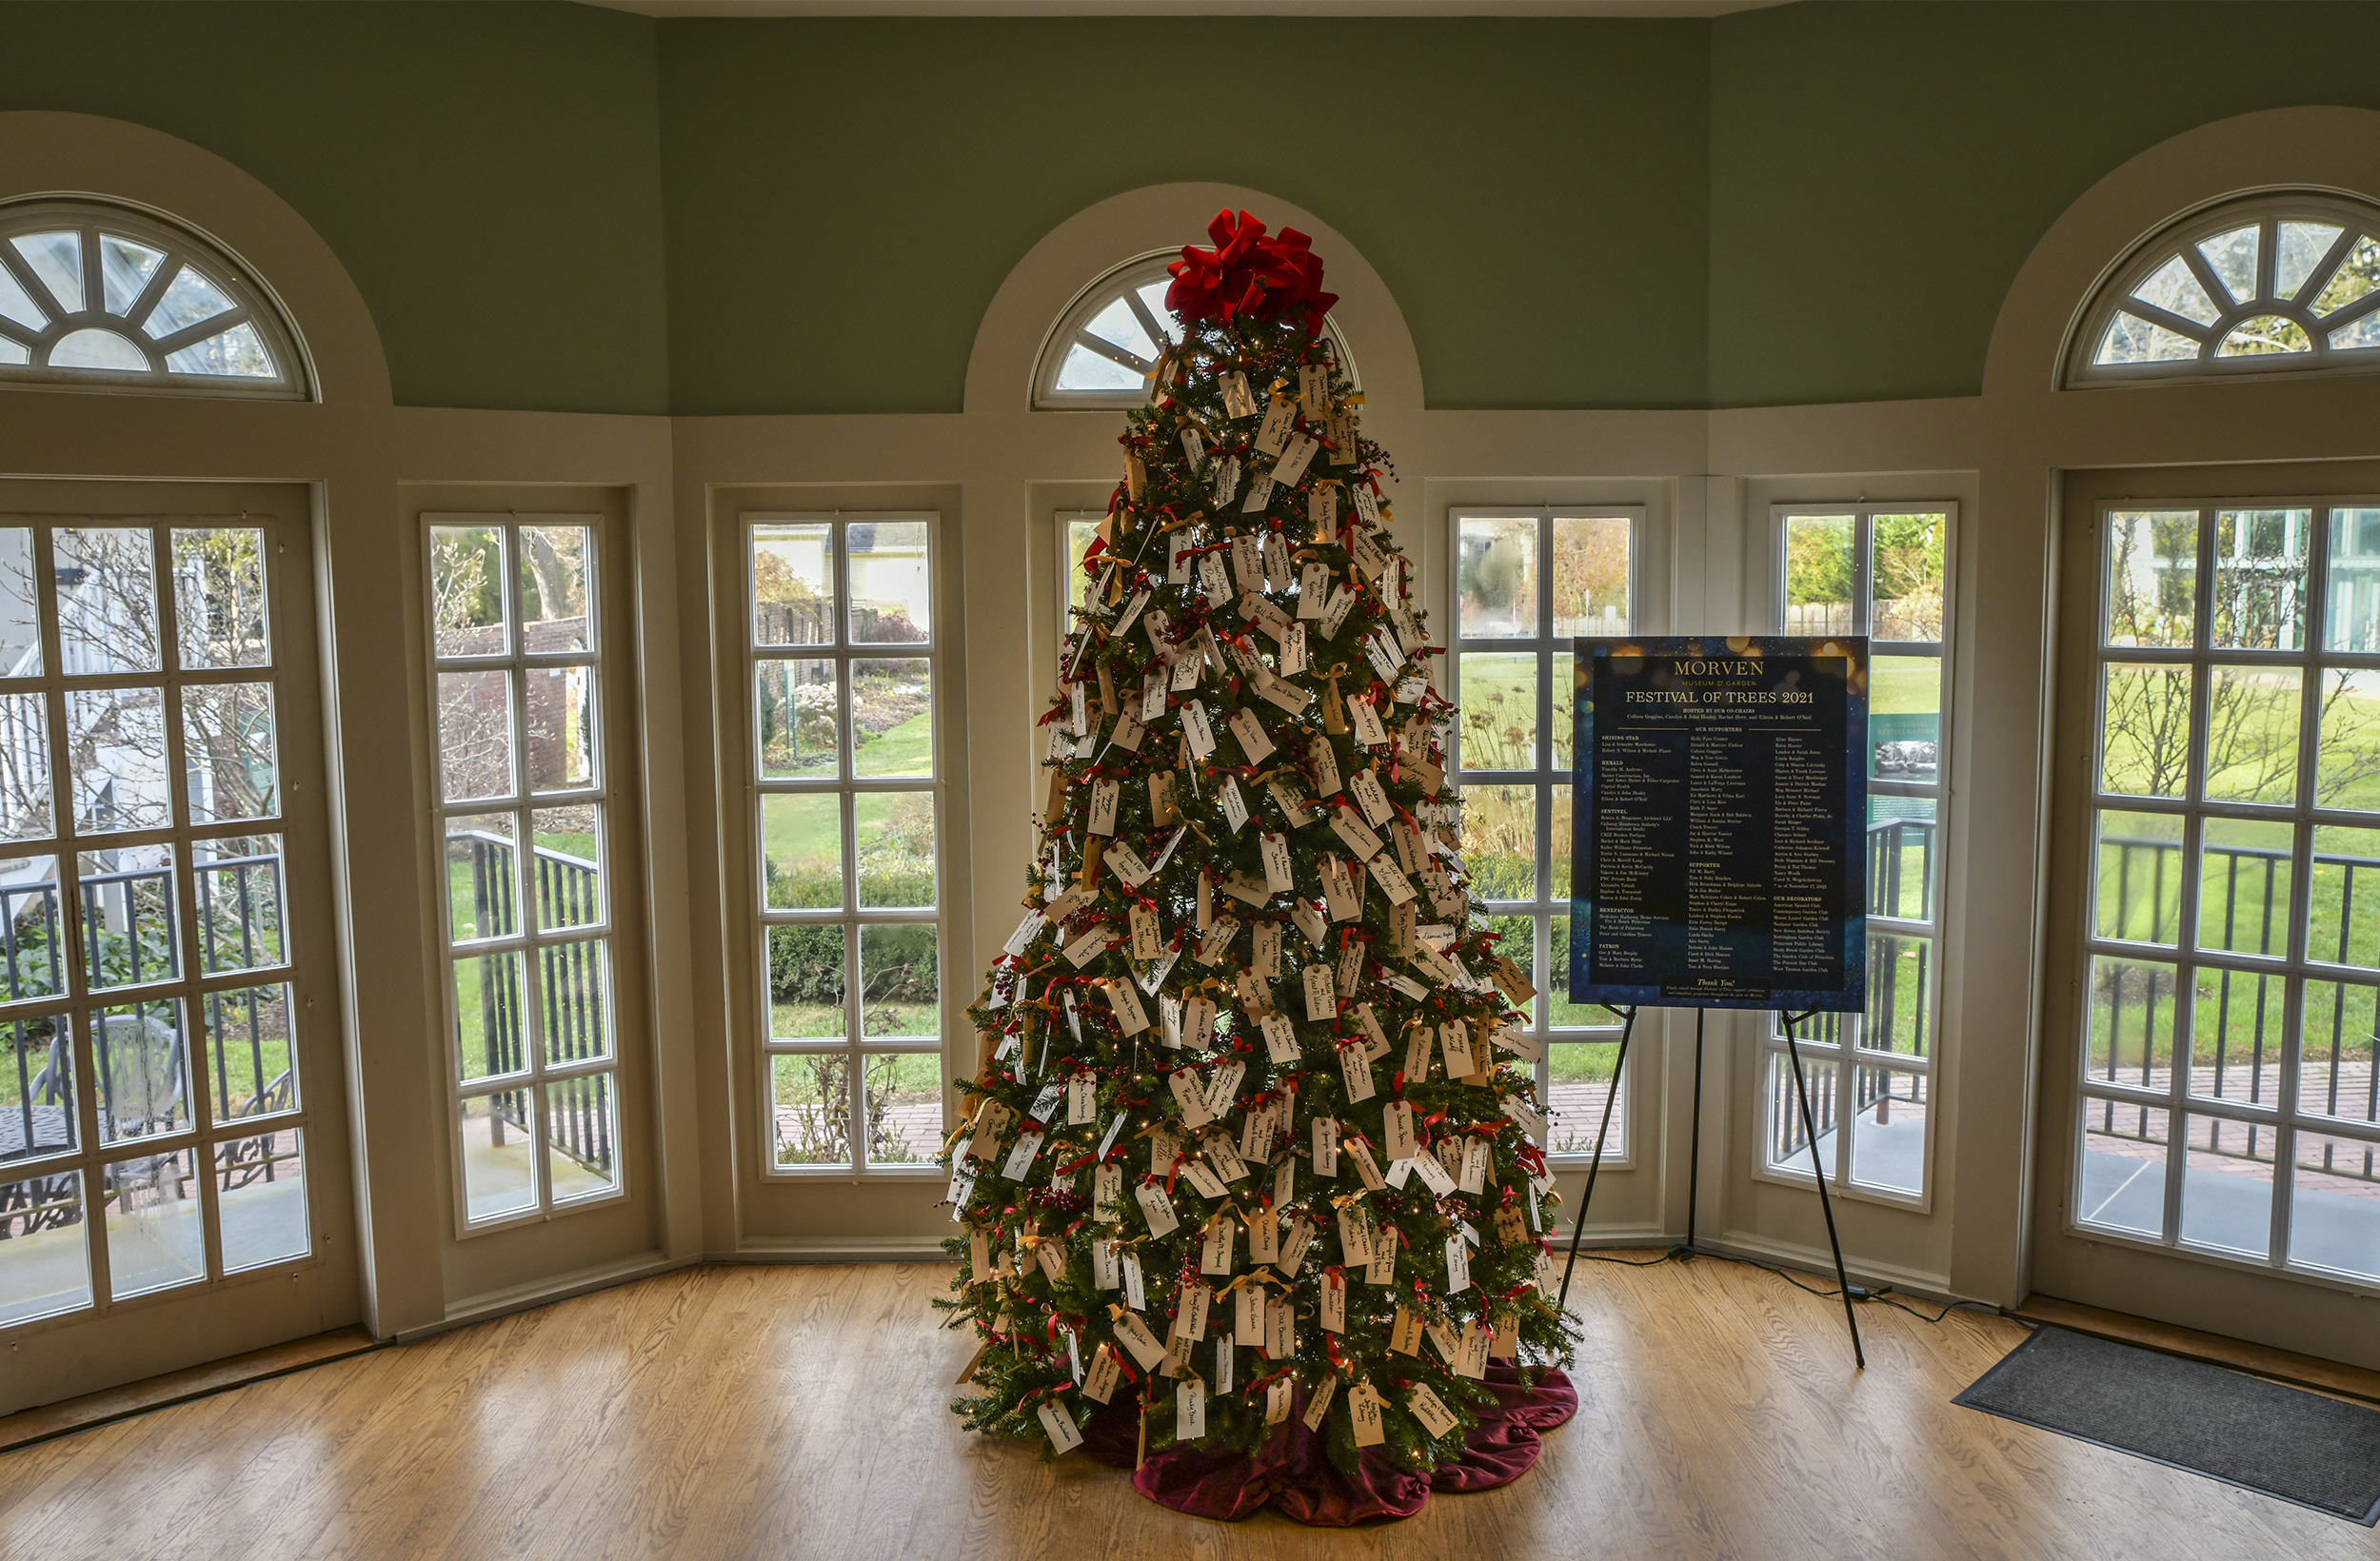 A Christmas tree adorned with dozens of tags with peoples names stands in the middle of a green room. The rear garden area can be seen through windows and doors surrounding the display.